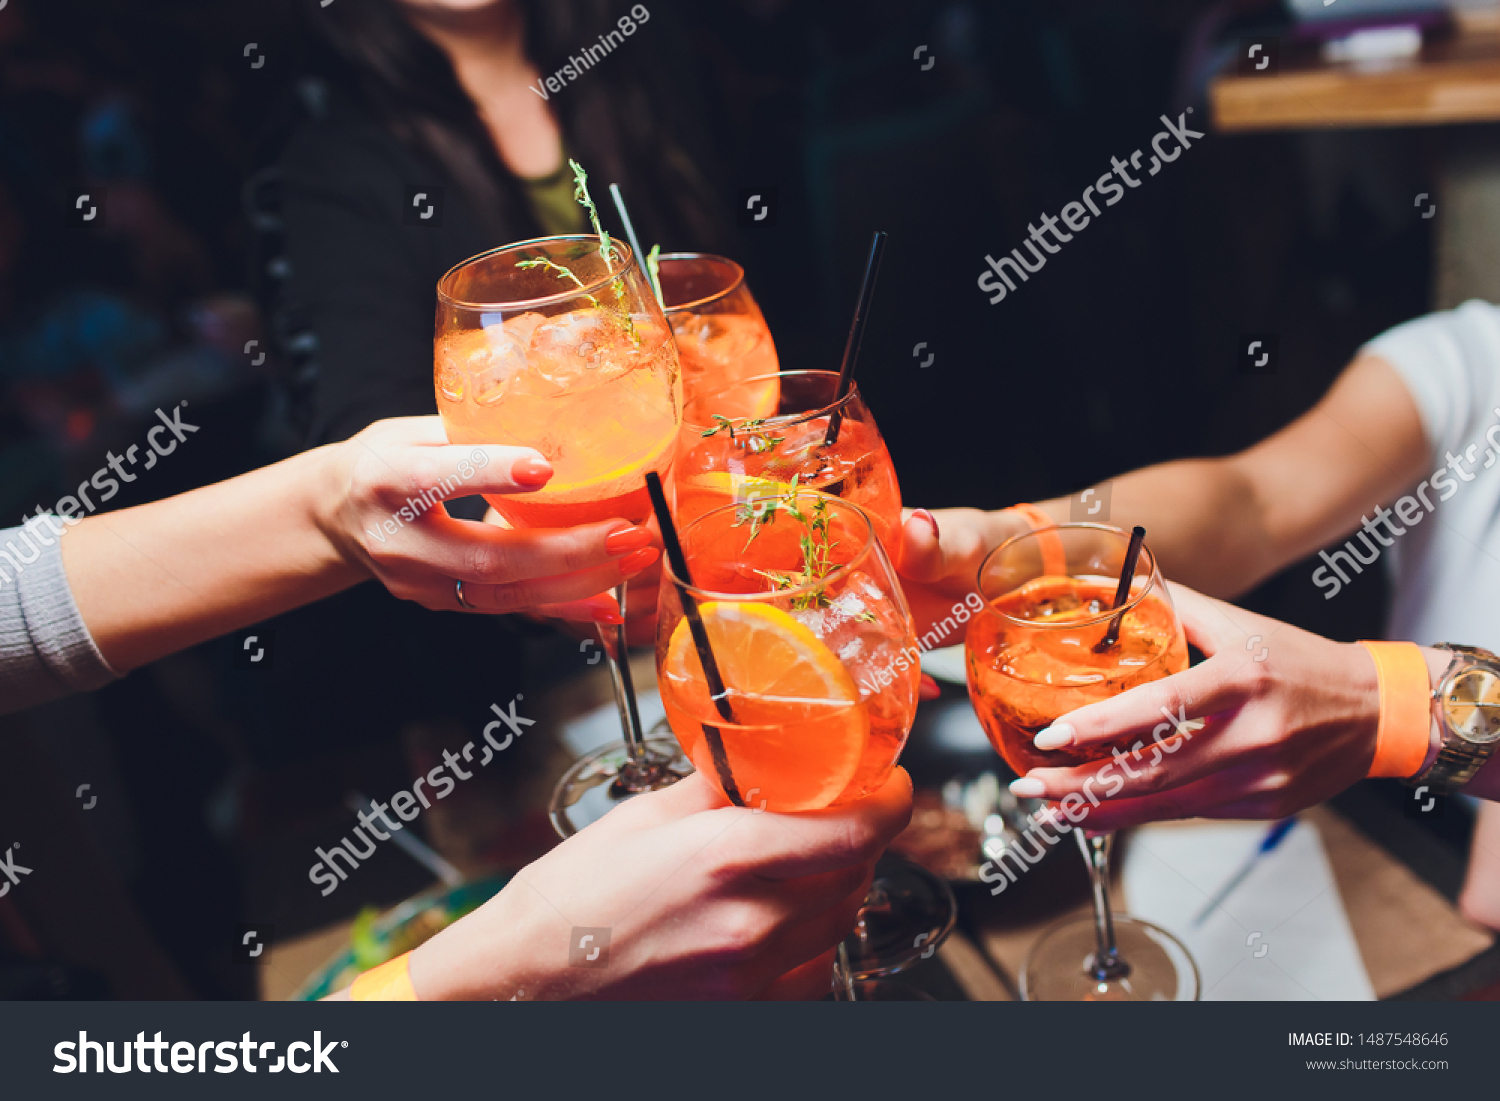 women raising a glasses of aperol spritz at the dinner table. #1487548646